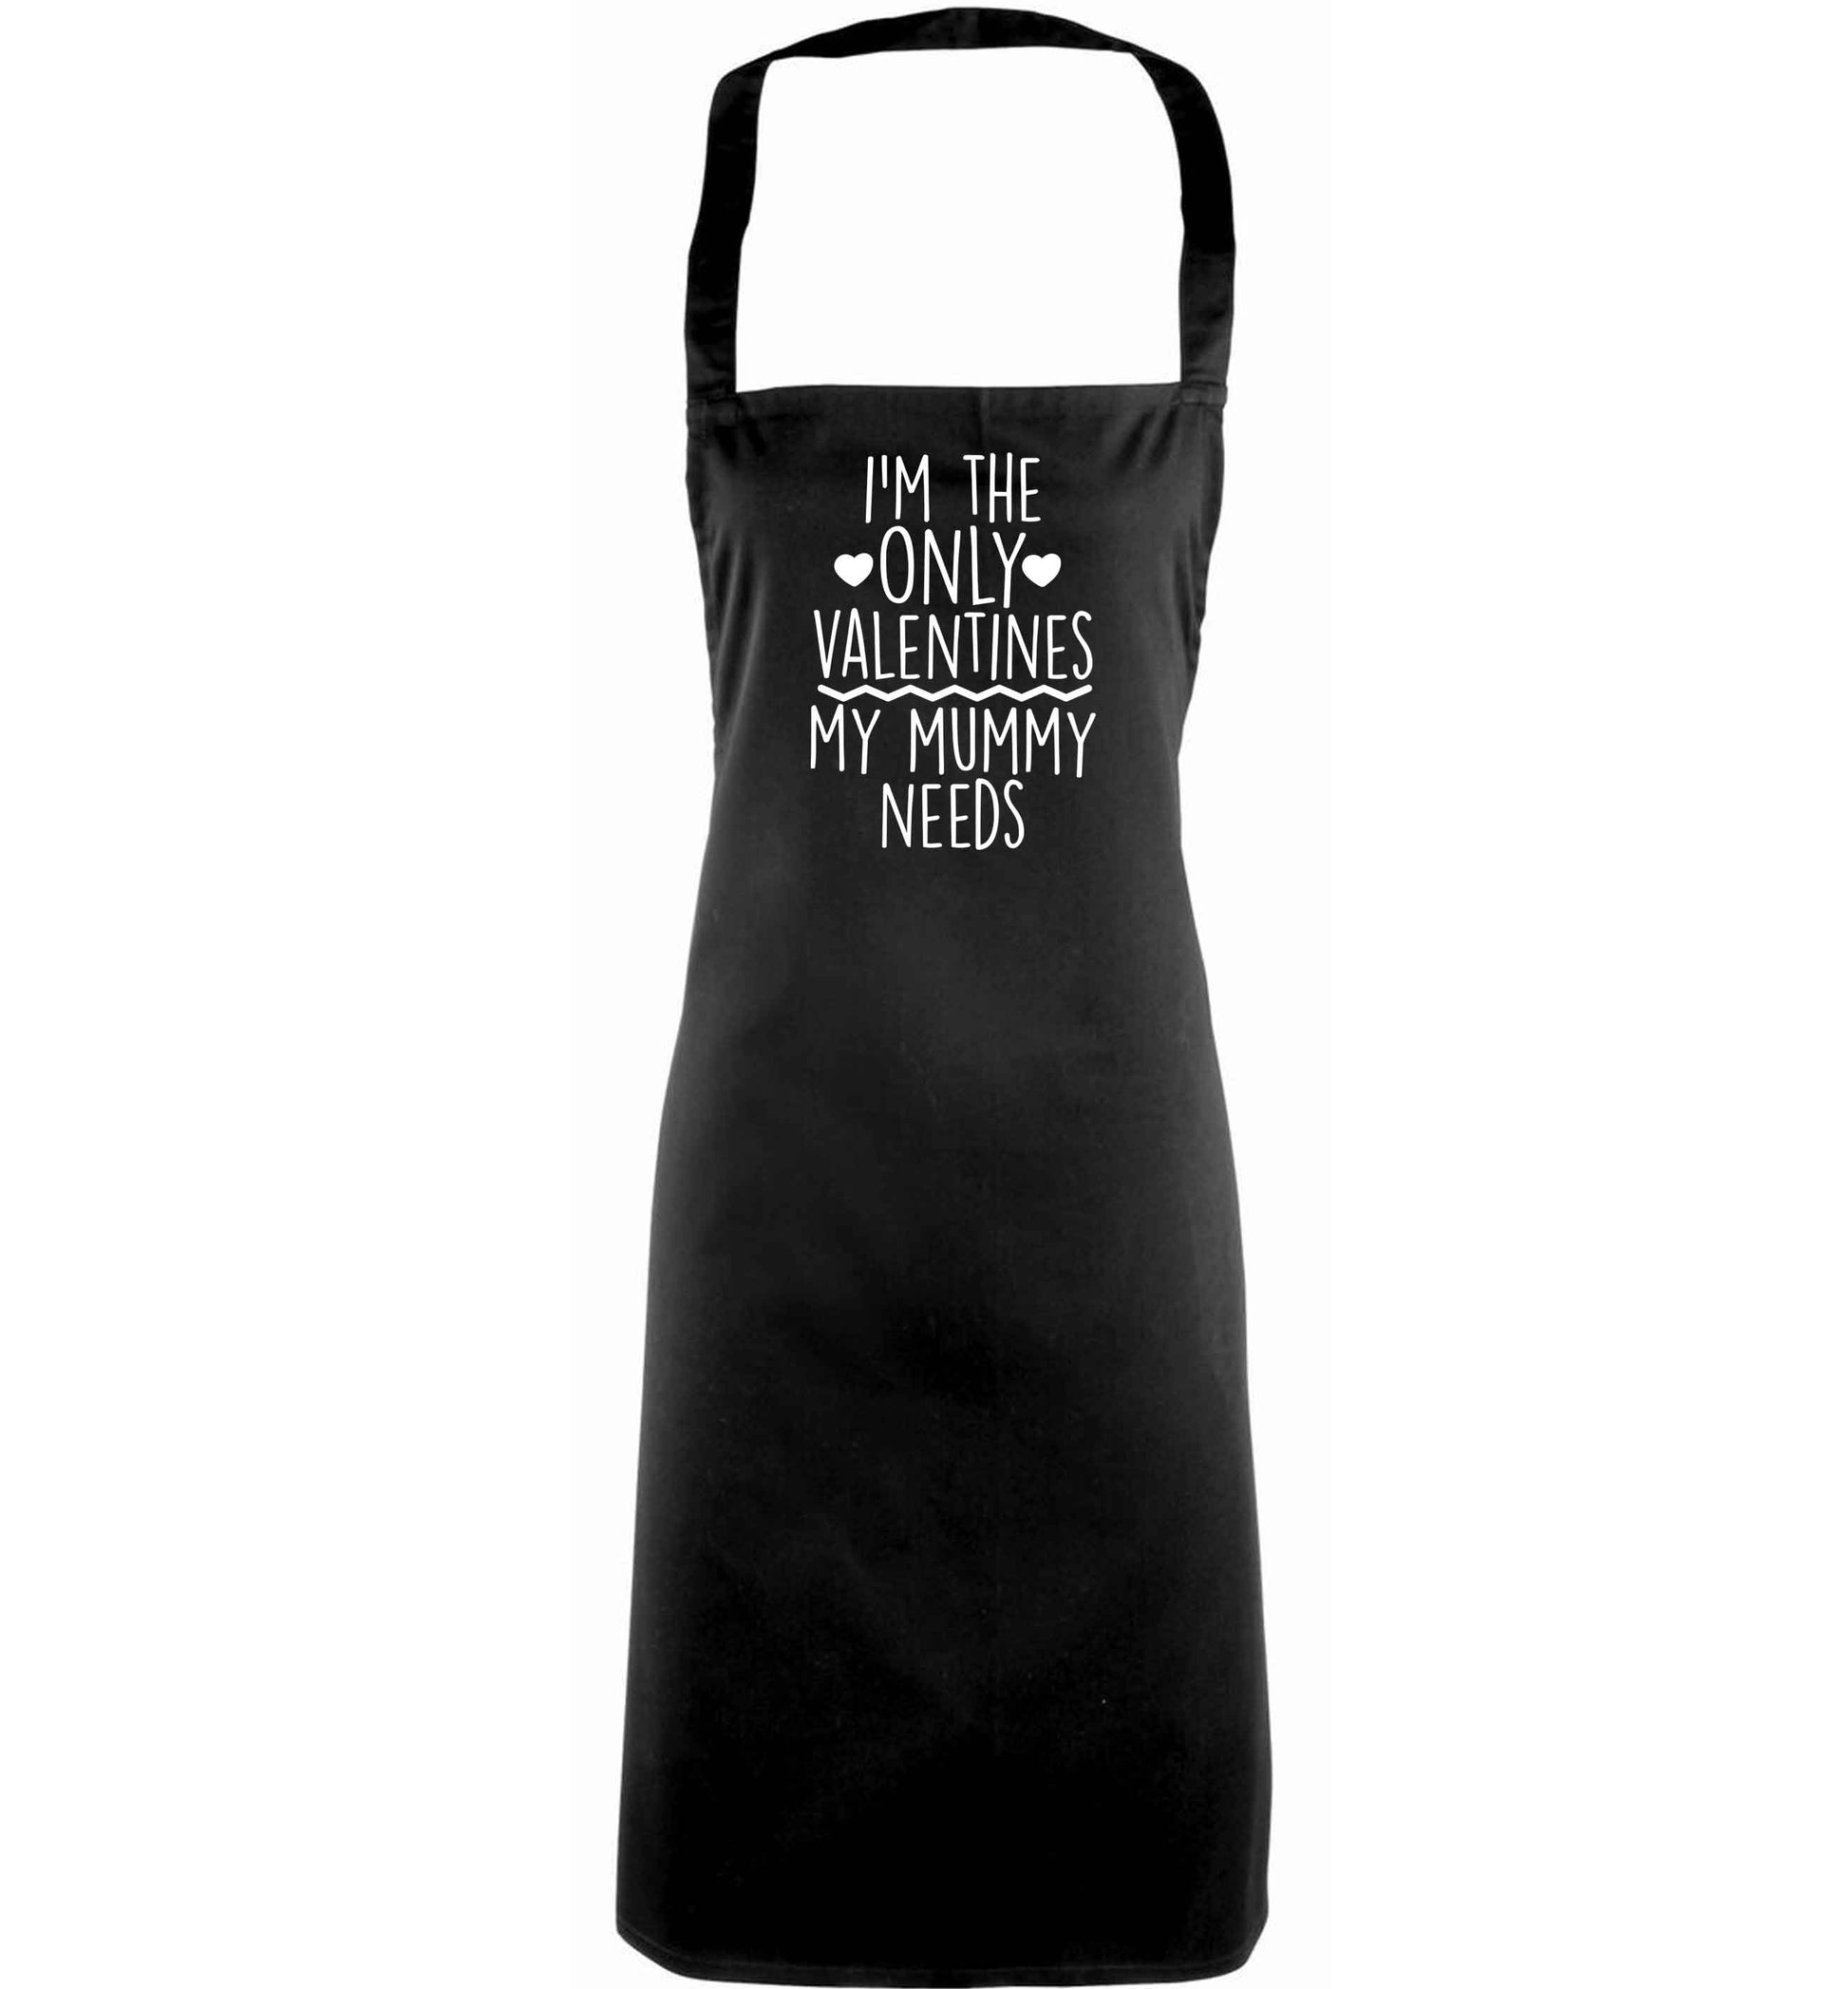 I'm the only valentines my mummy needs adults black apron